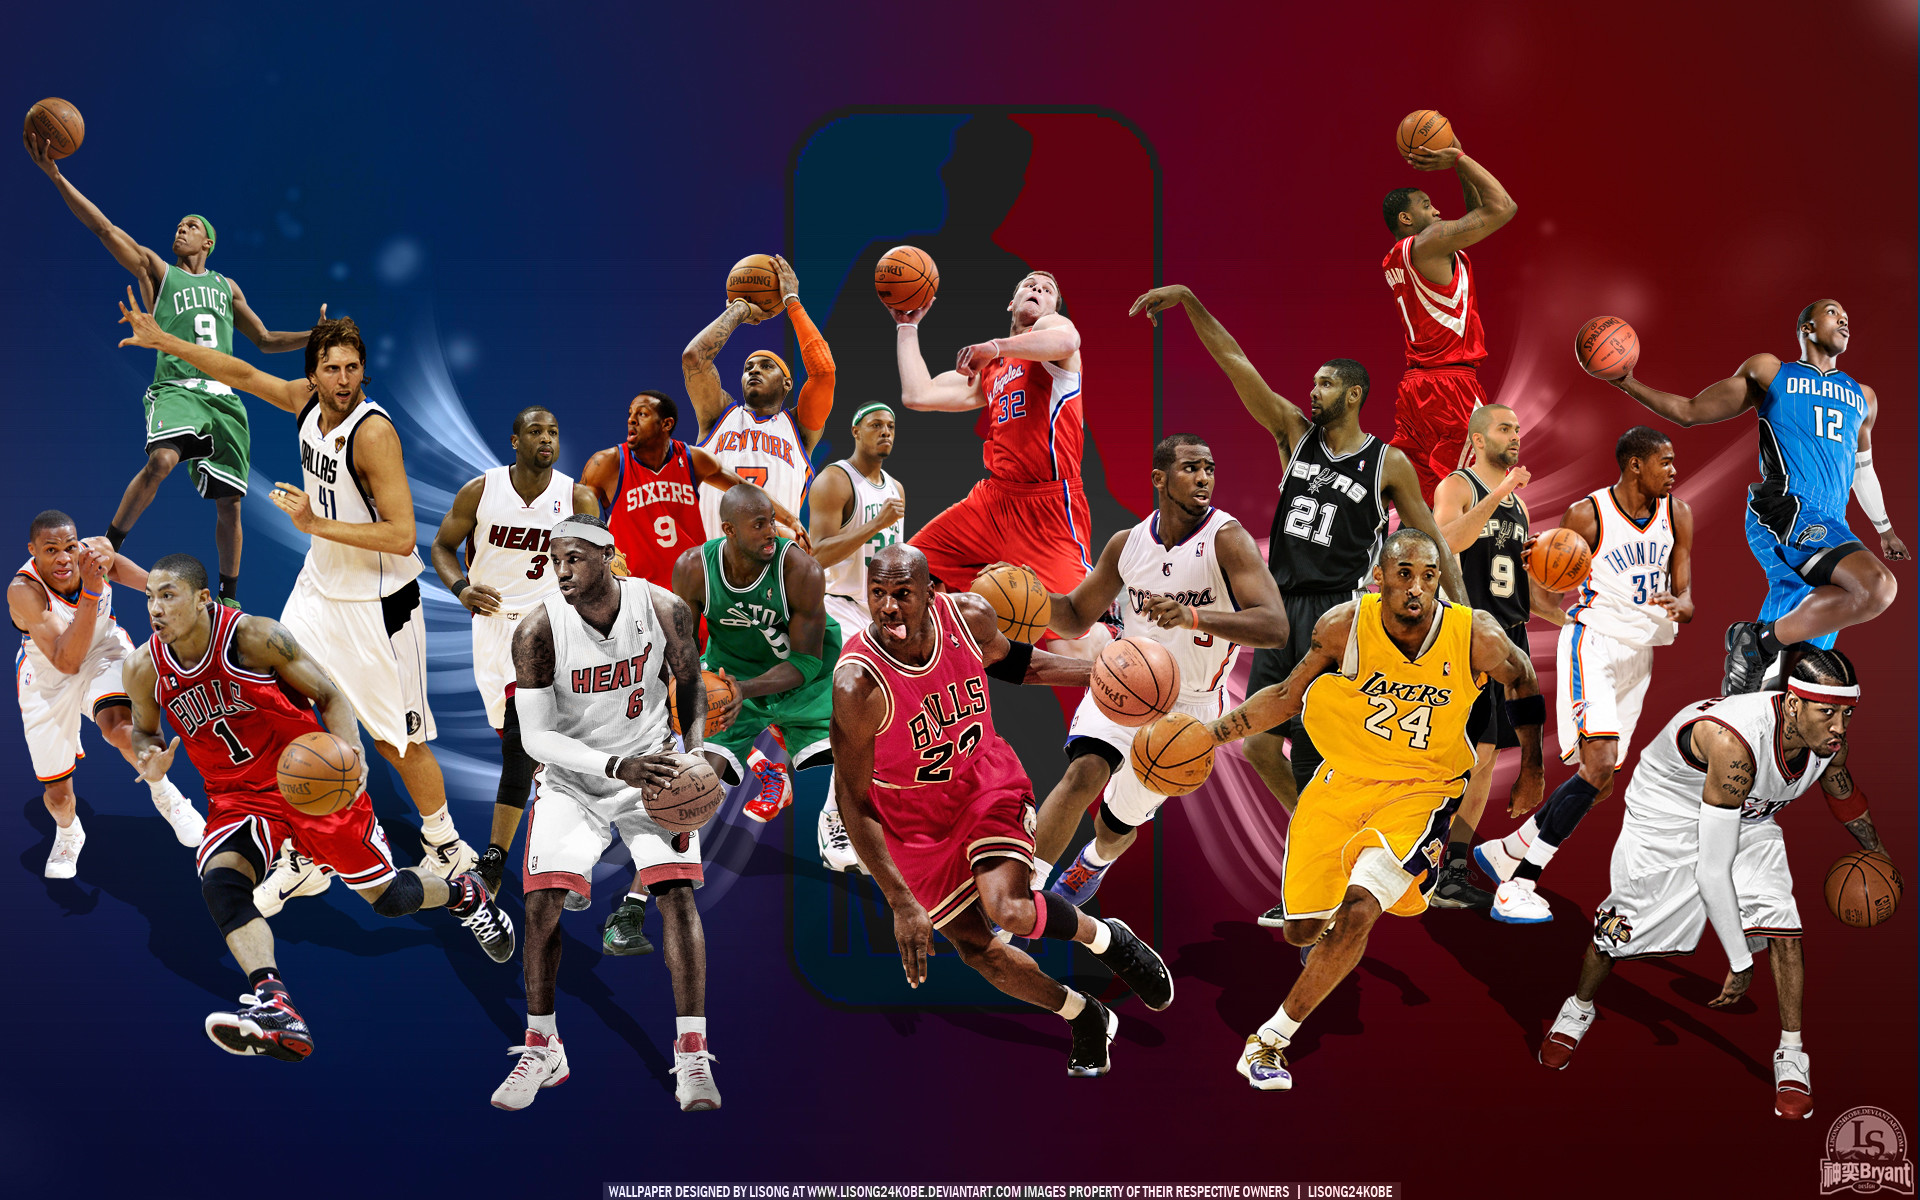 1920x1200 Basketball Wallpapers. Awesome Basketball Wallpapers. Basketball Wallpapers  2015. Basketball Wallpapers For Android.